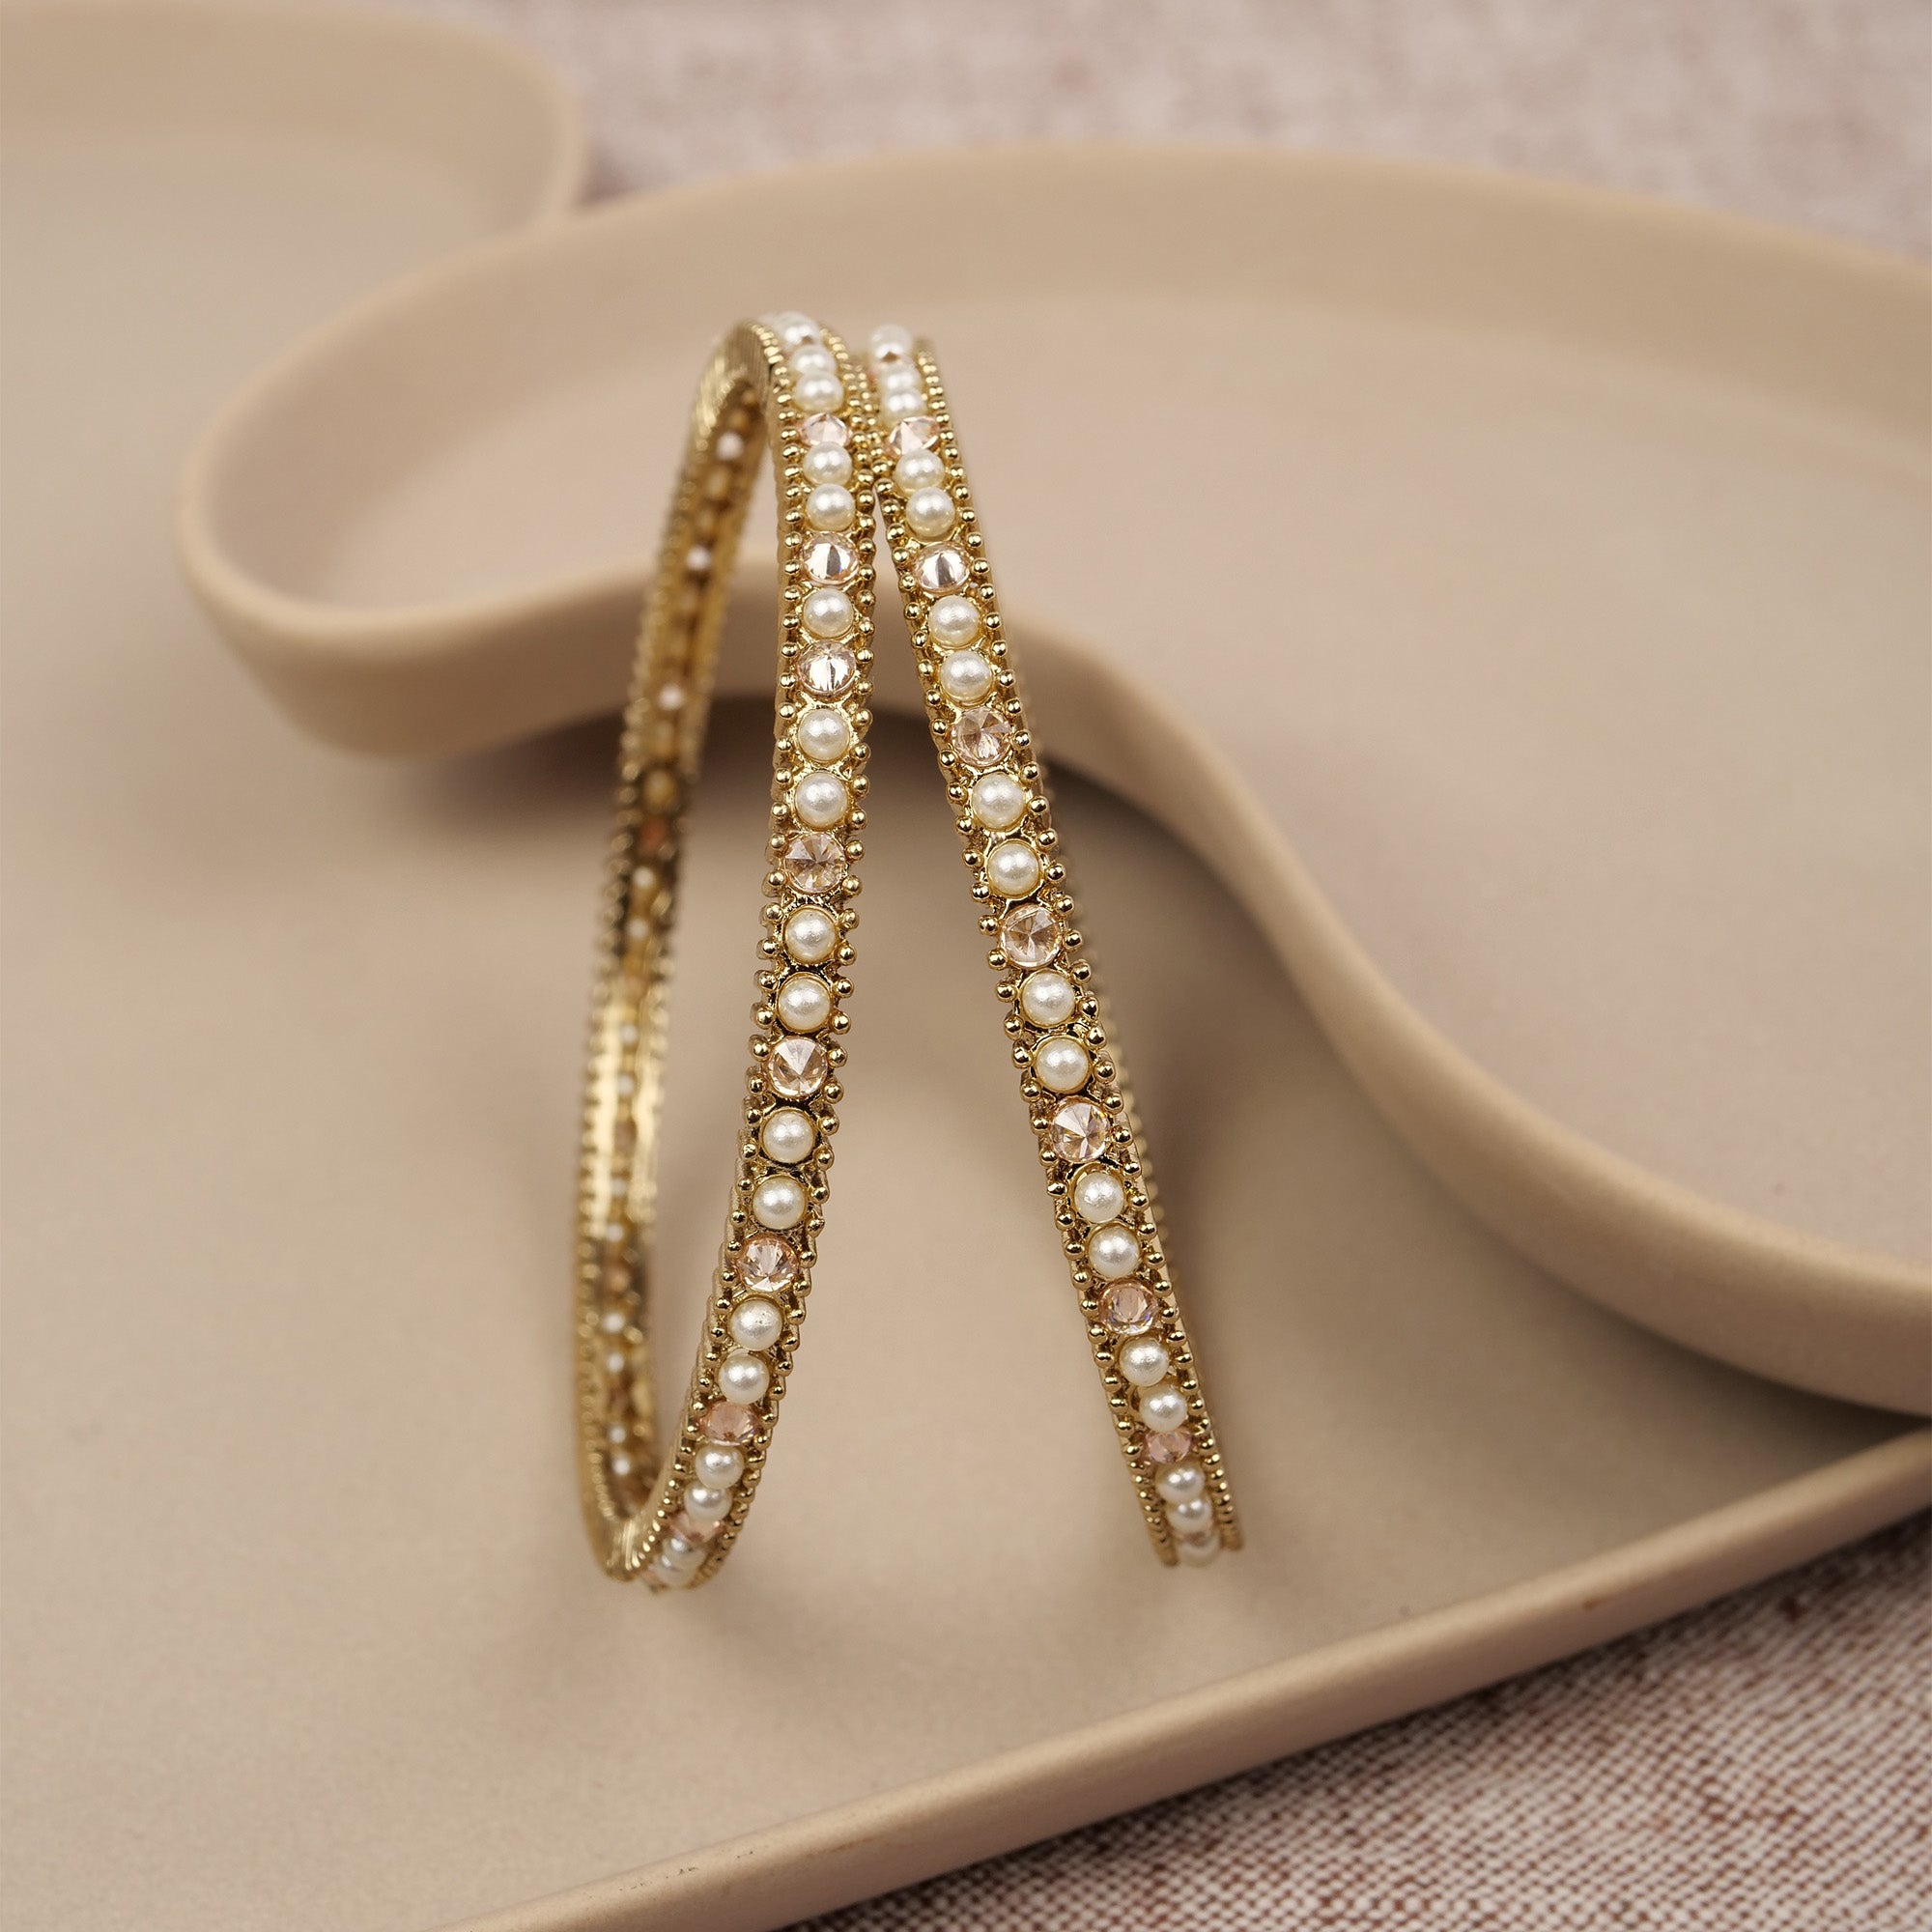 Aahna Antique Gold Bangles in Pearl